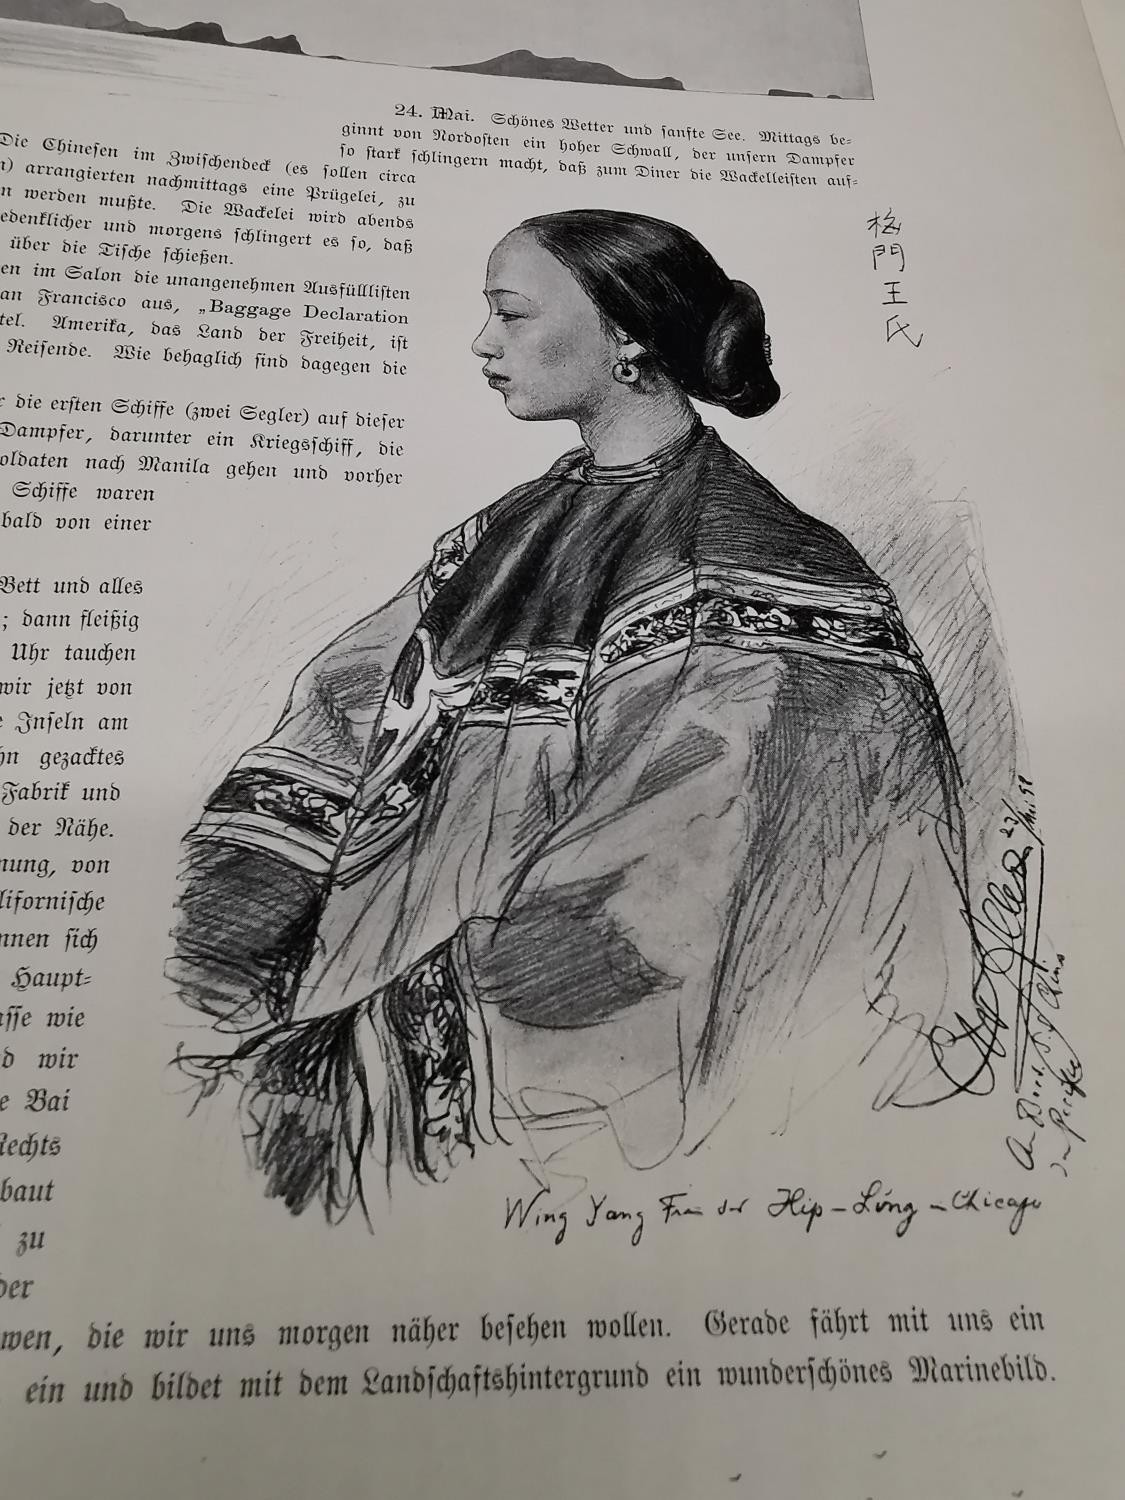 A German book showing drawings of natives of the far east Asia titled 'Rund um die Erde' (1898) by - Image 16 of 20